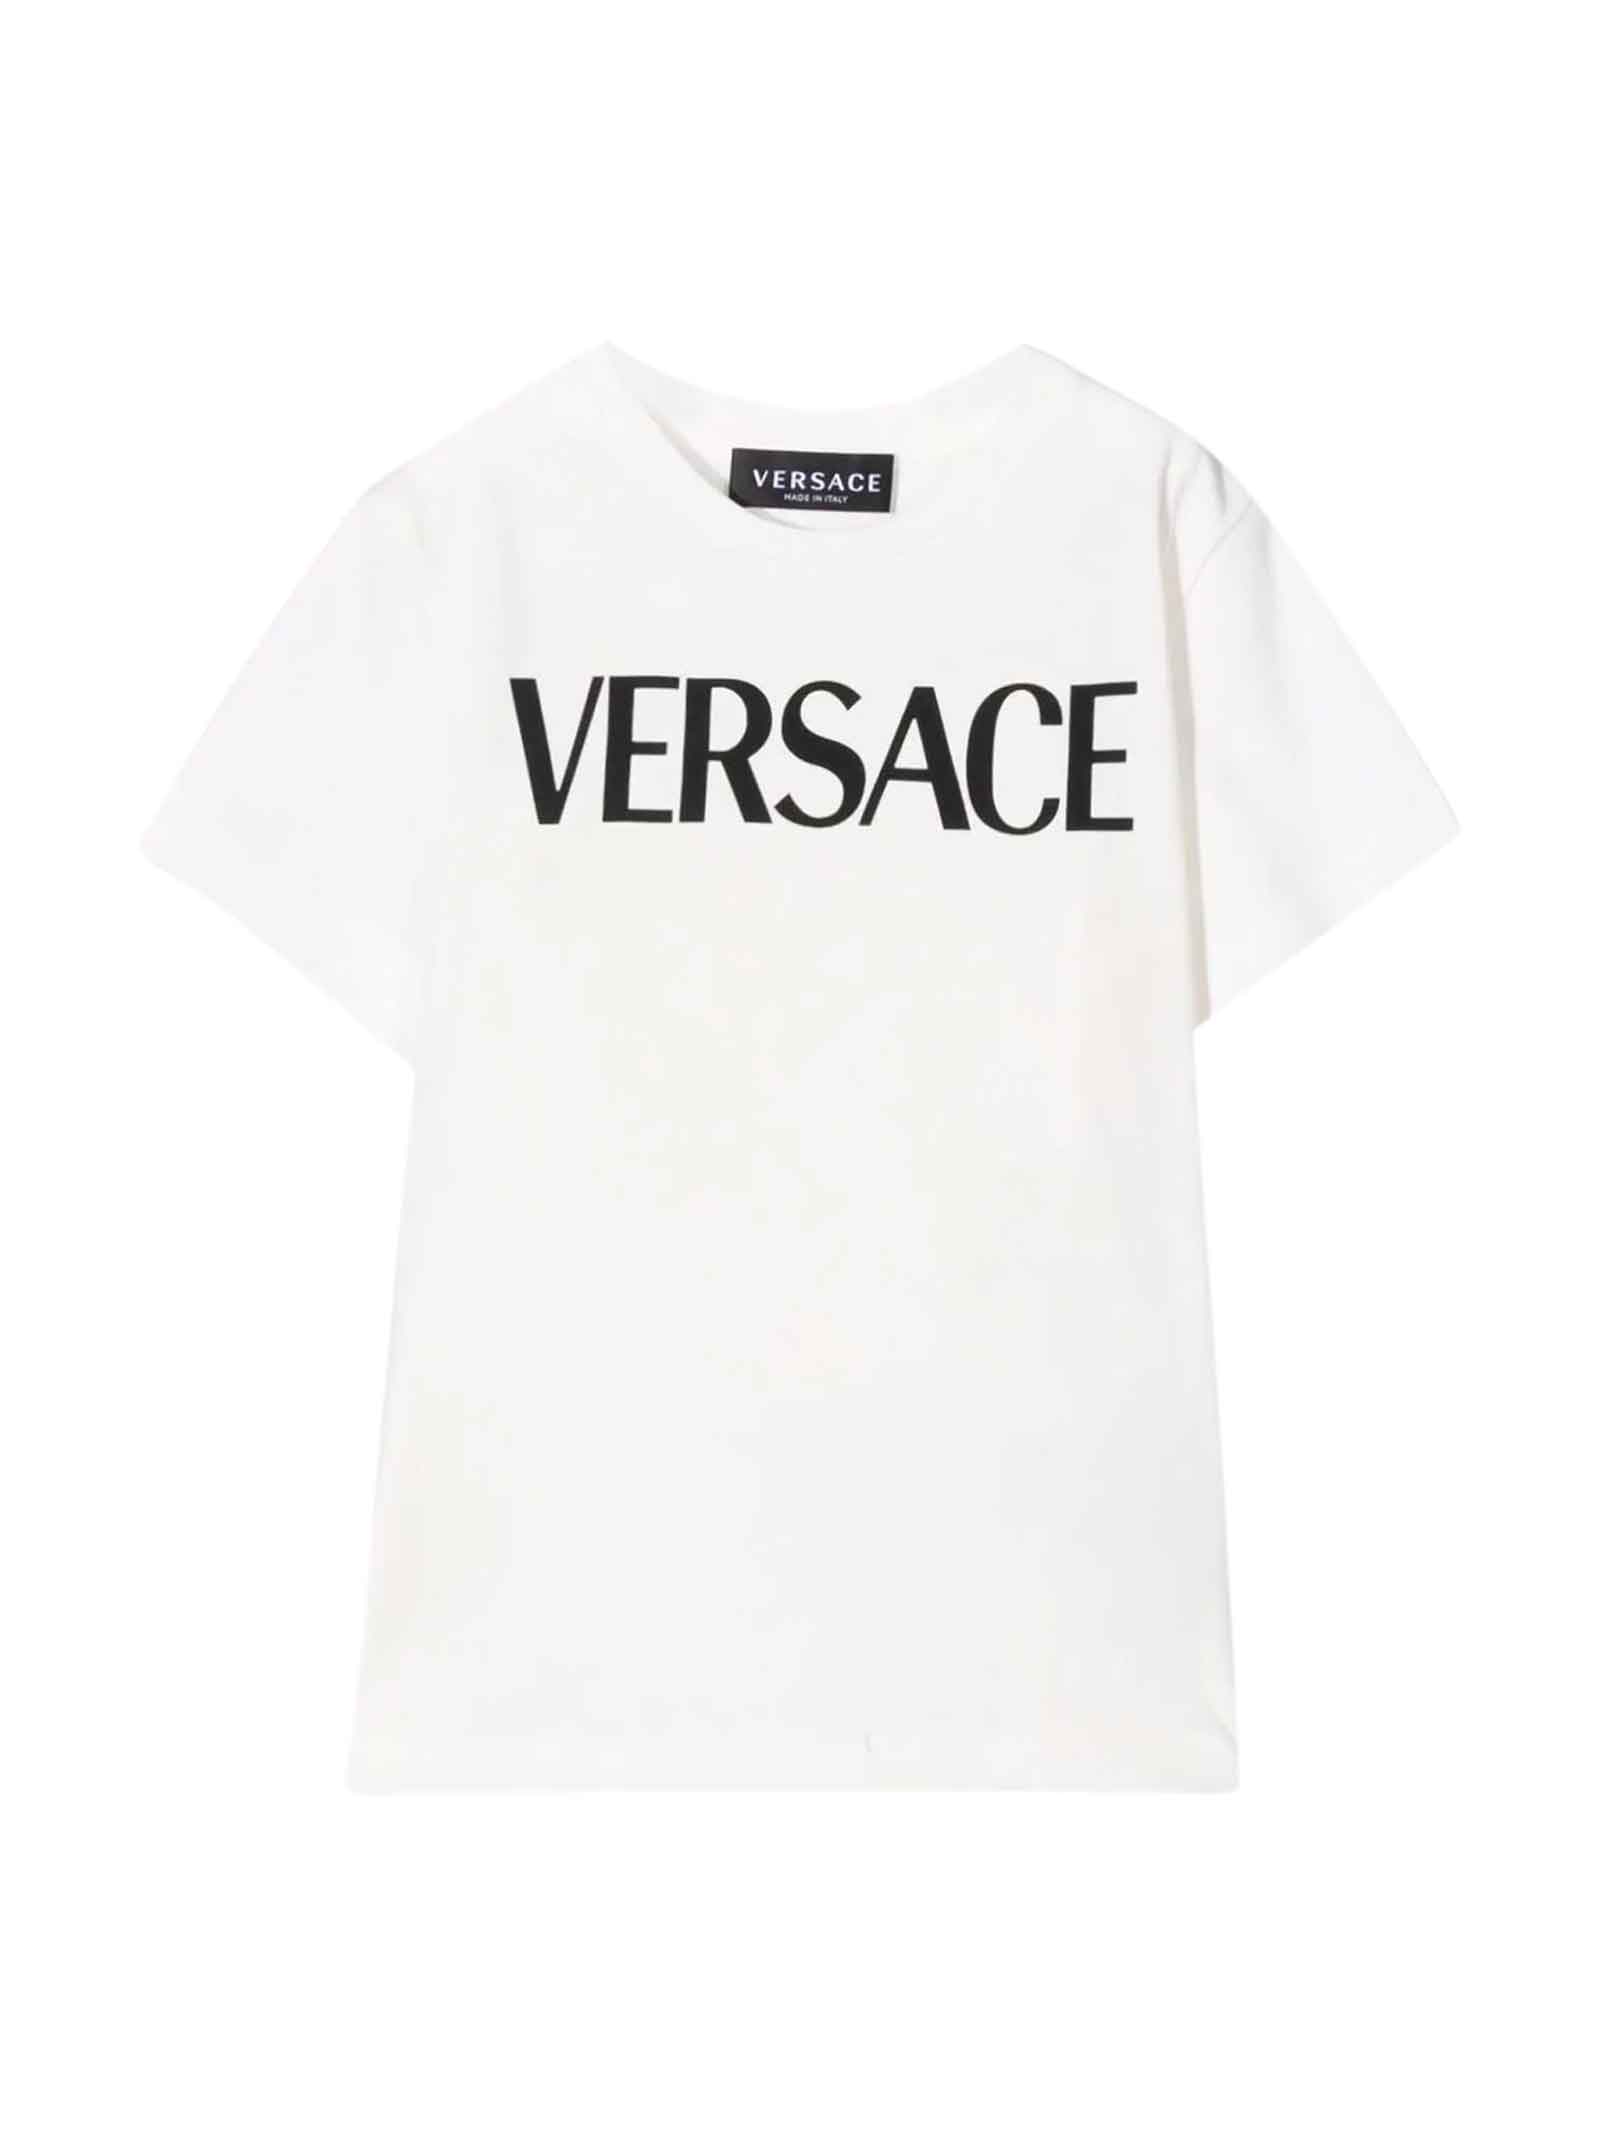 Versace White T-shirt With Multicolor Print And Black Logo Kids